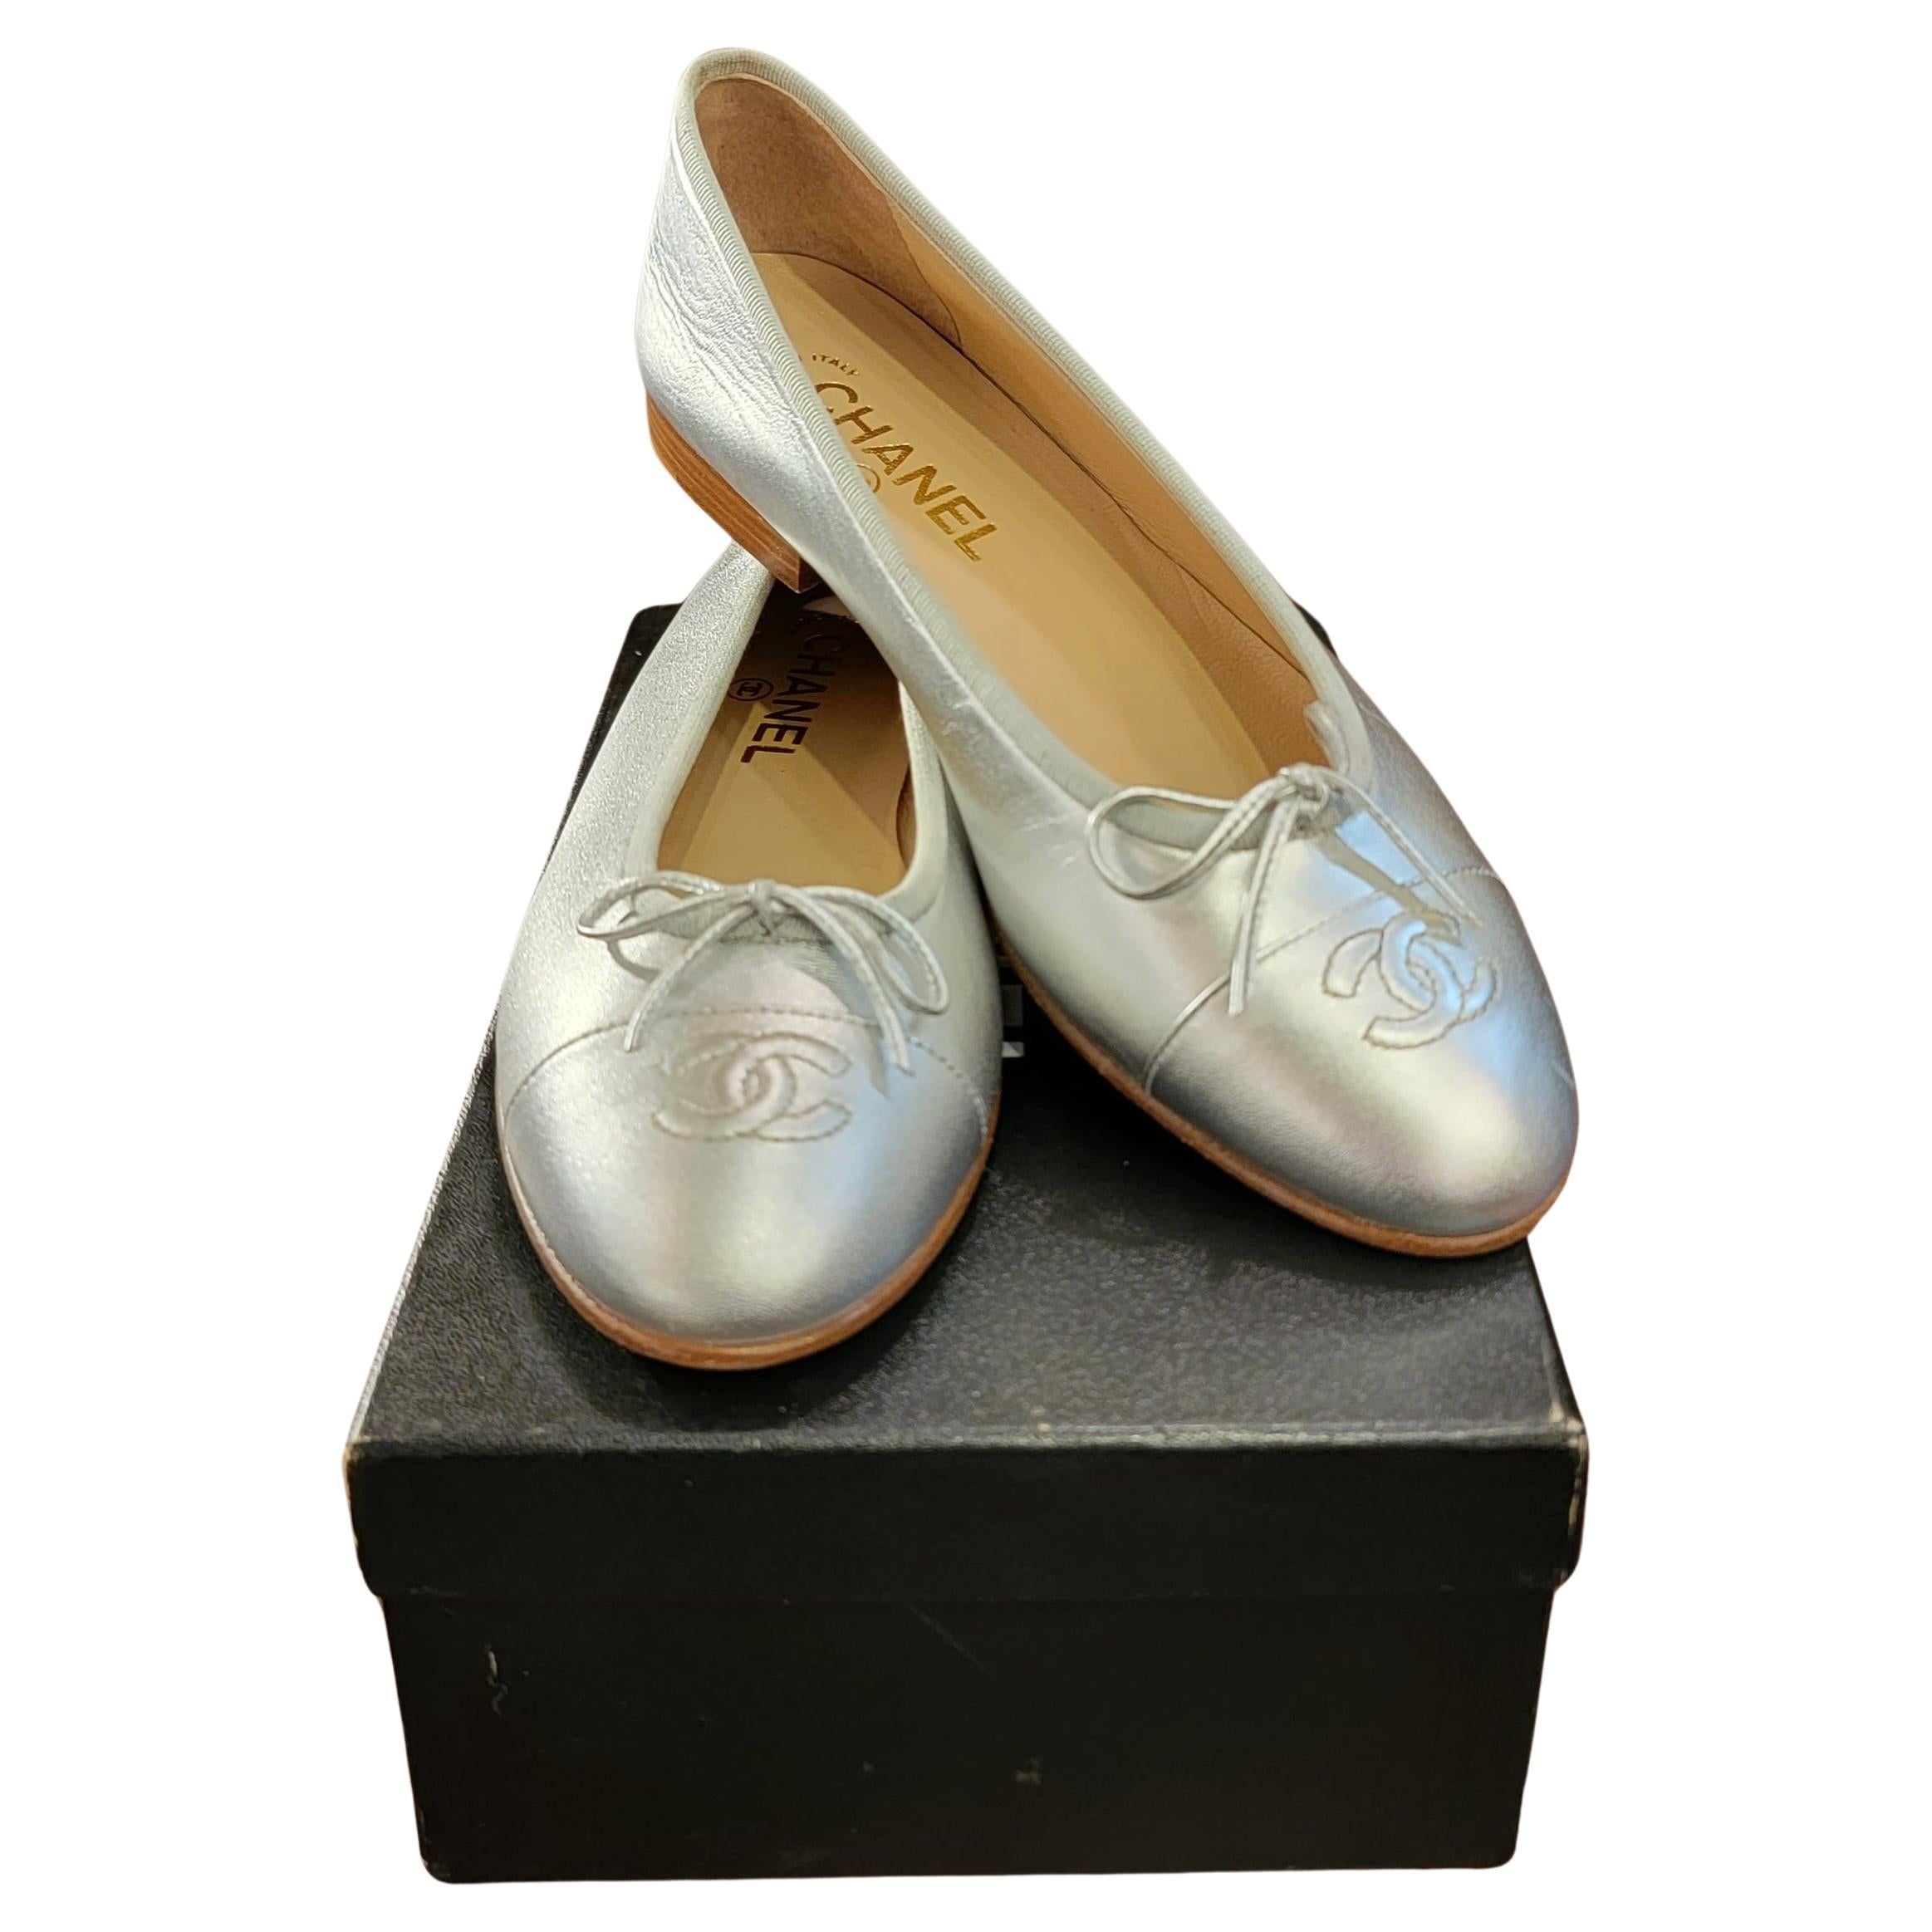 Rare Brand New Chanel Ballerina Size 39 Metalic Silver Shoes For Sale